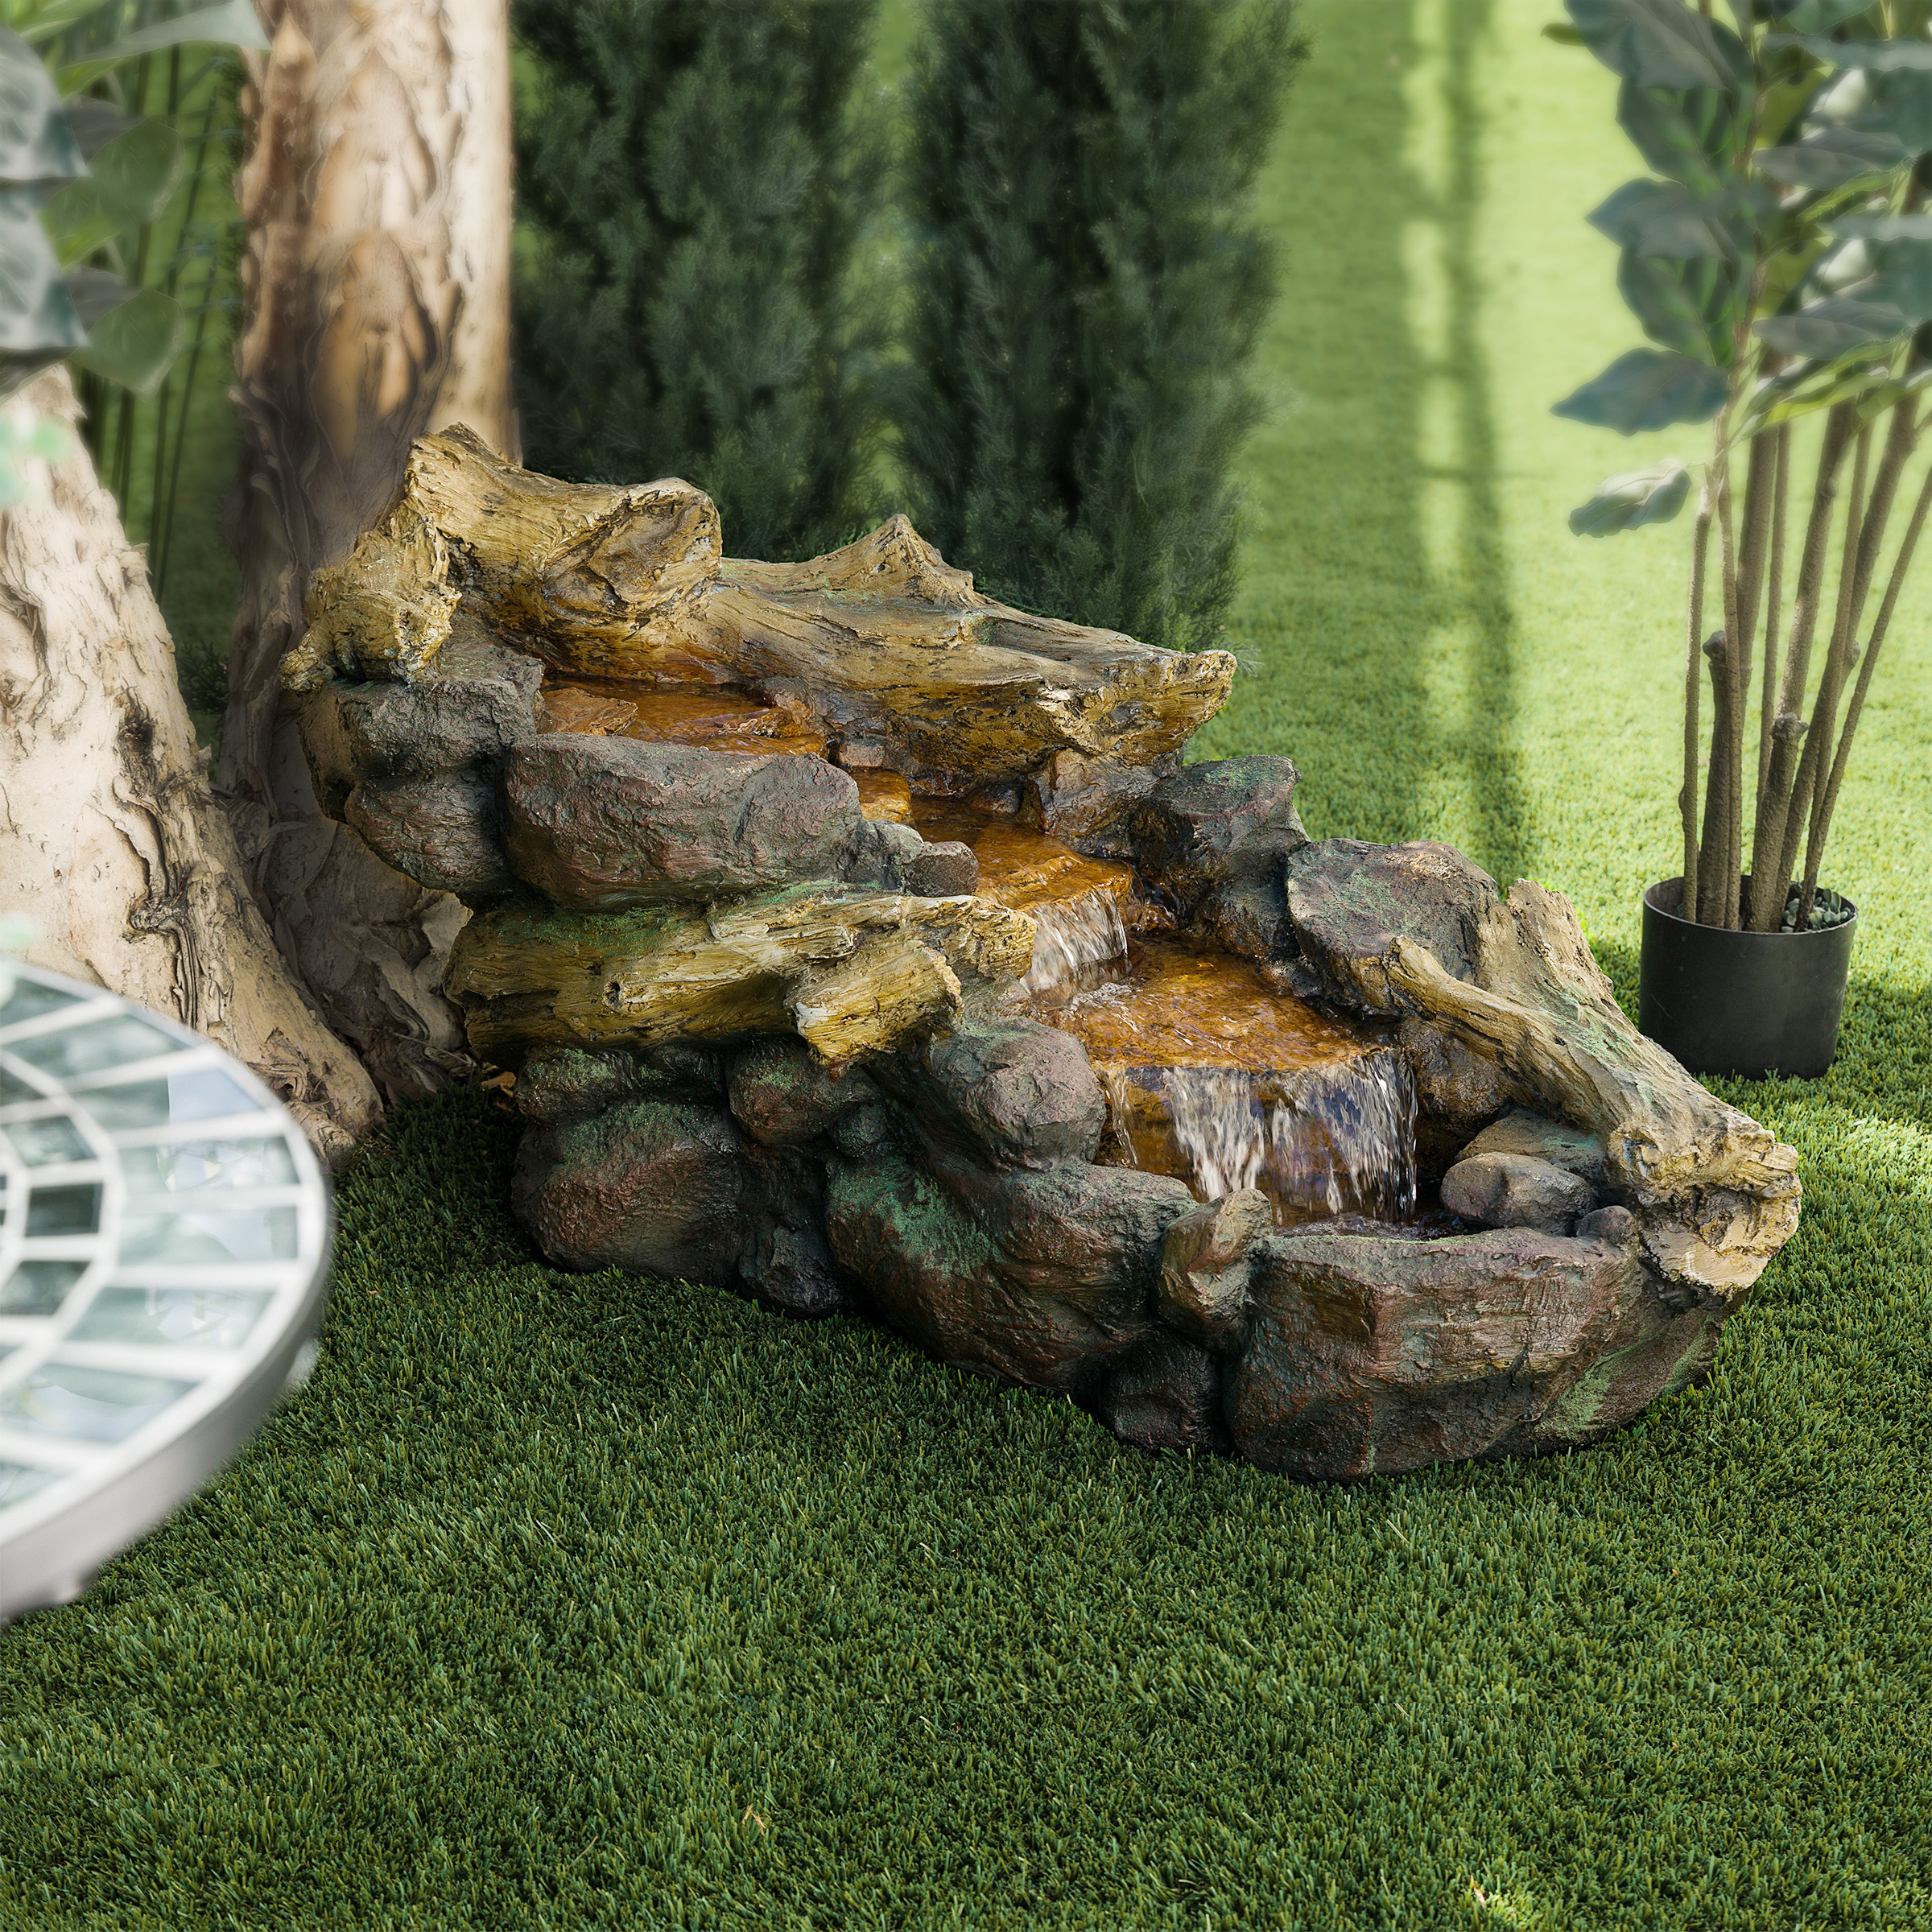 Alpine Corporation 41" Long Indoor/Outdoor River Rock and Log Fountain with LED Lights - image 1 of 12